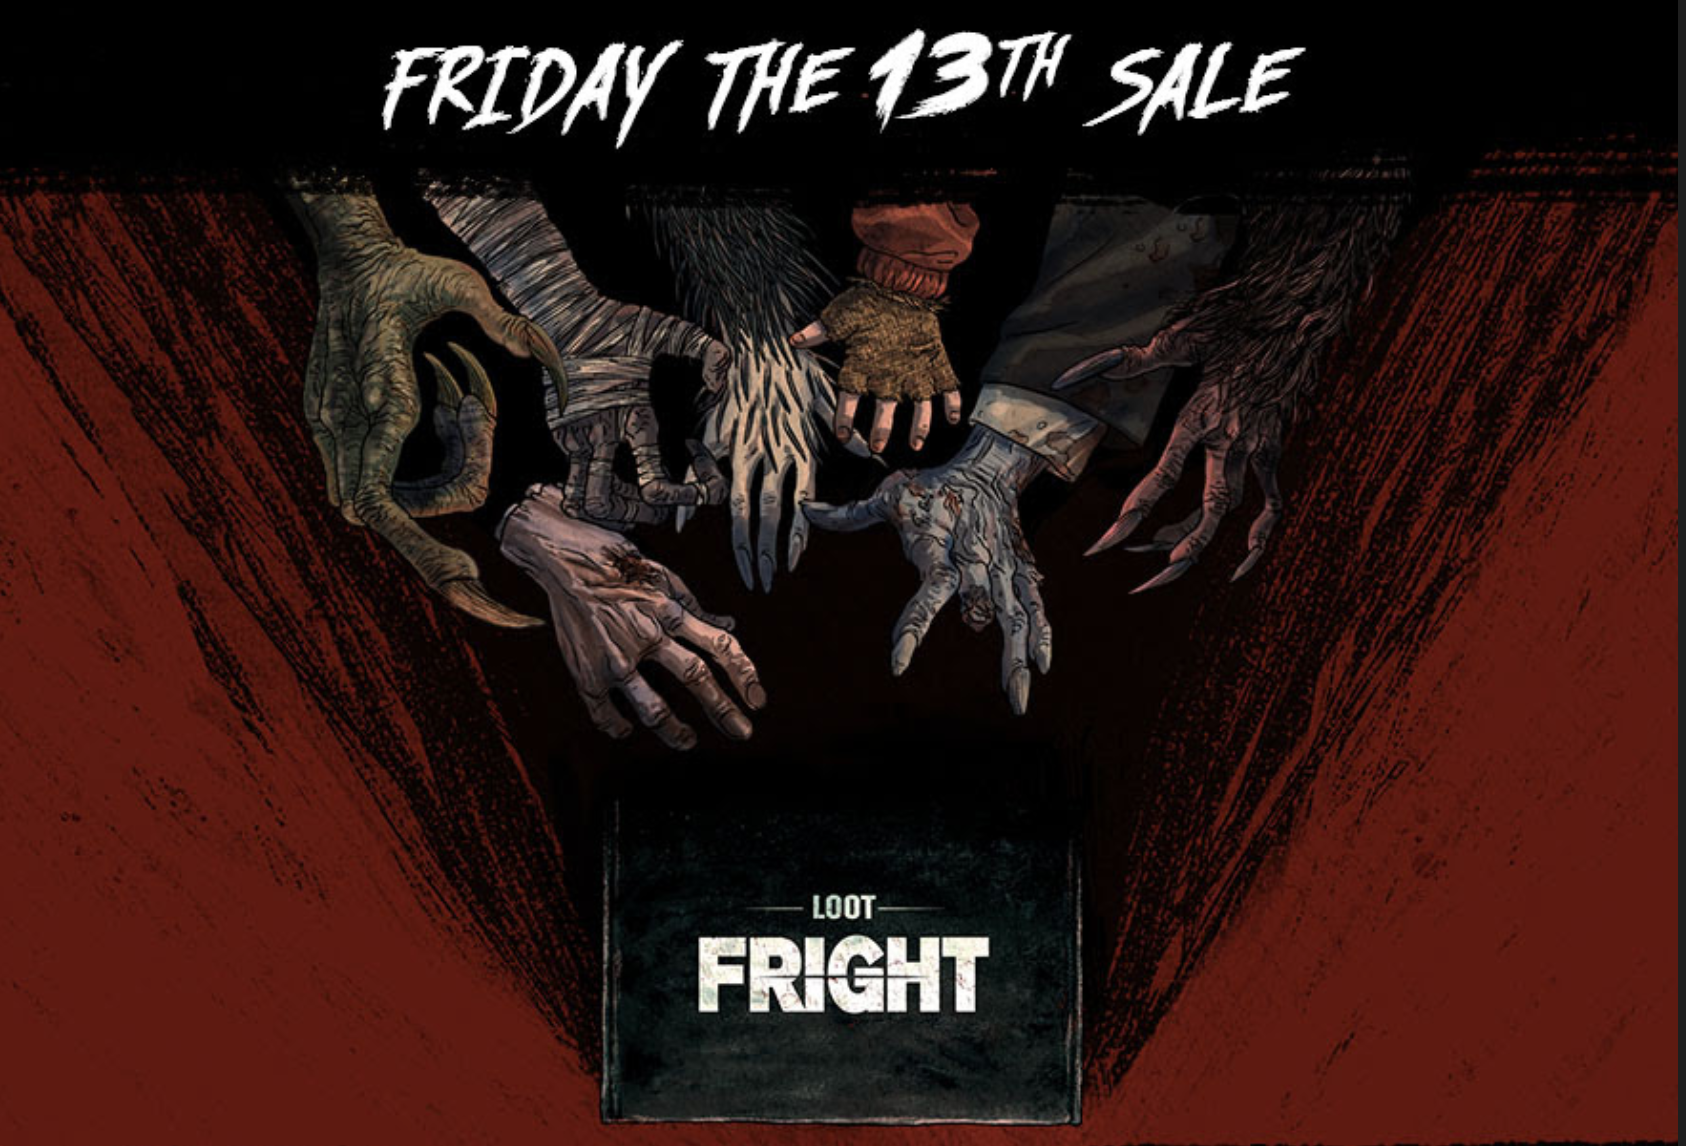 Loot Fright Flash Sale – 13% Off Subscriptions!